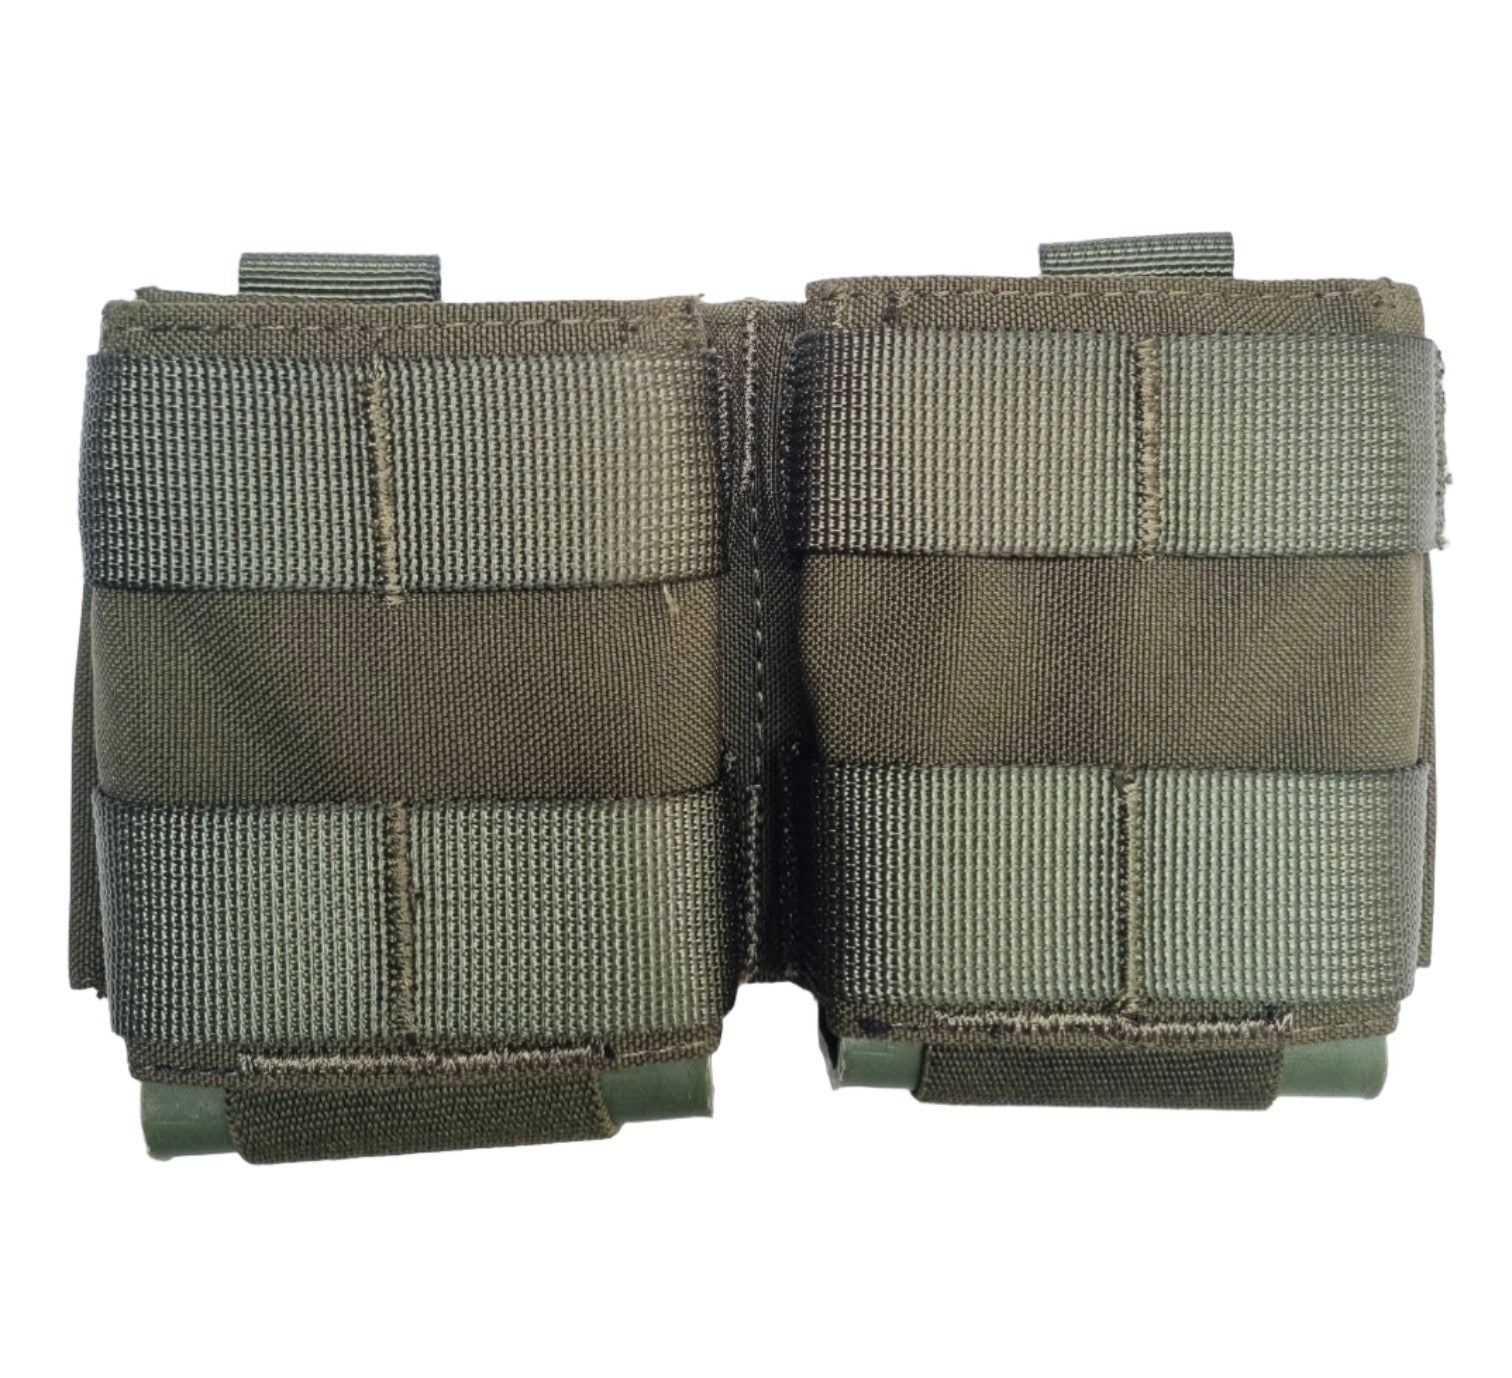 SHE-23032 GRIPTAC DOUBLE M4/M16  MAG POUCH OD